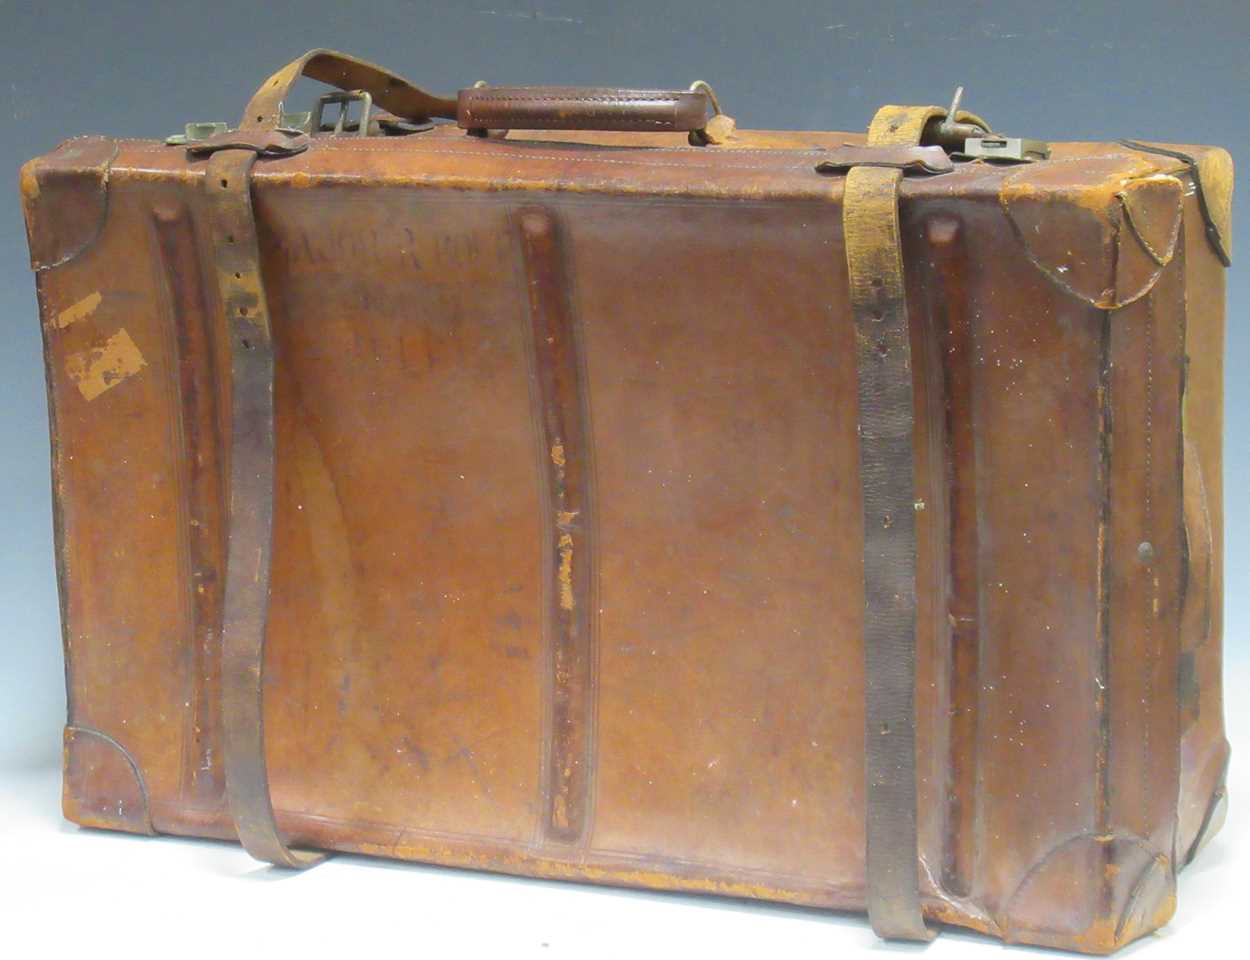 An early 20th century leather strapped suitcase locks by USA indistinctly stamped on the outside